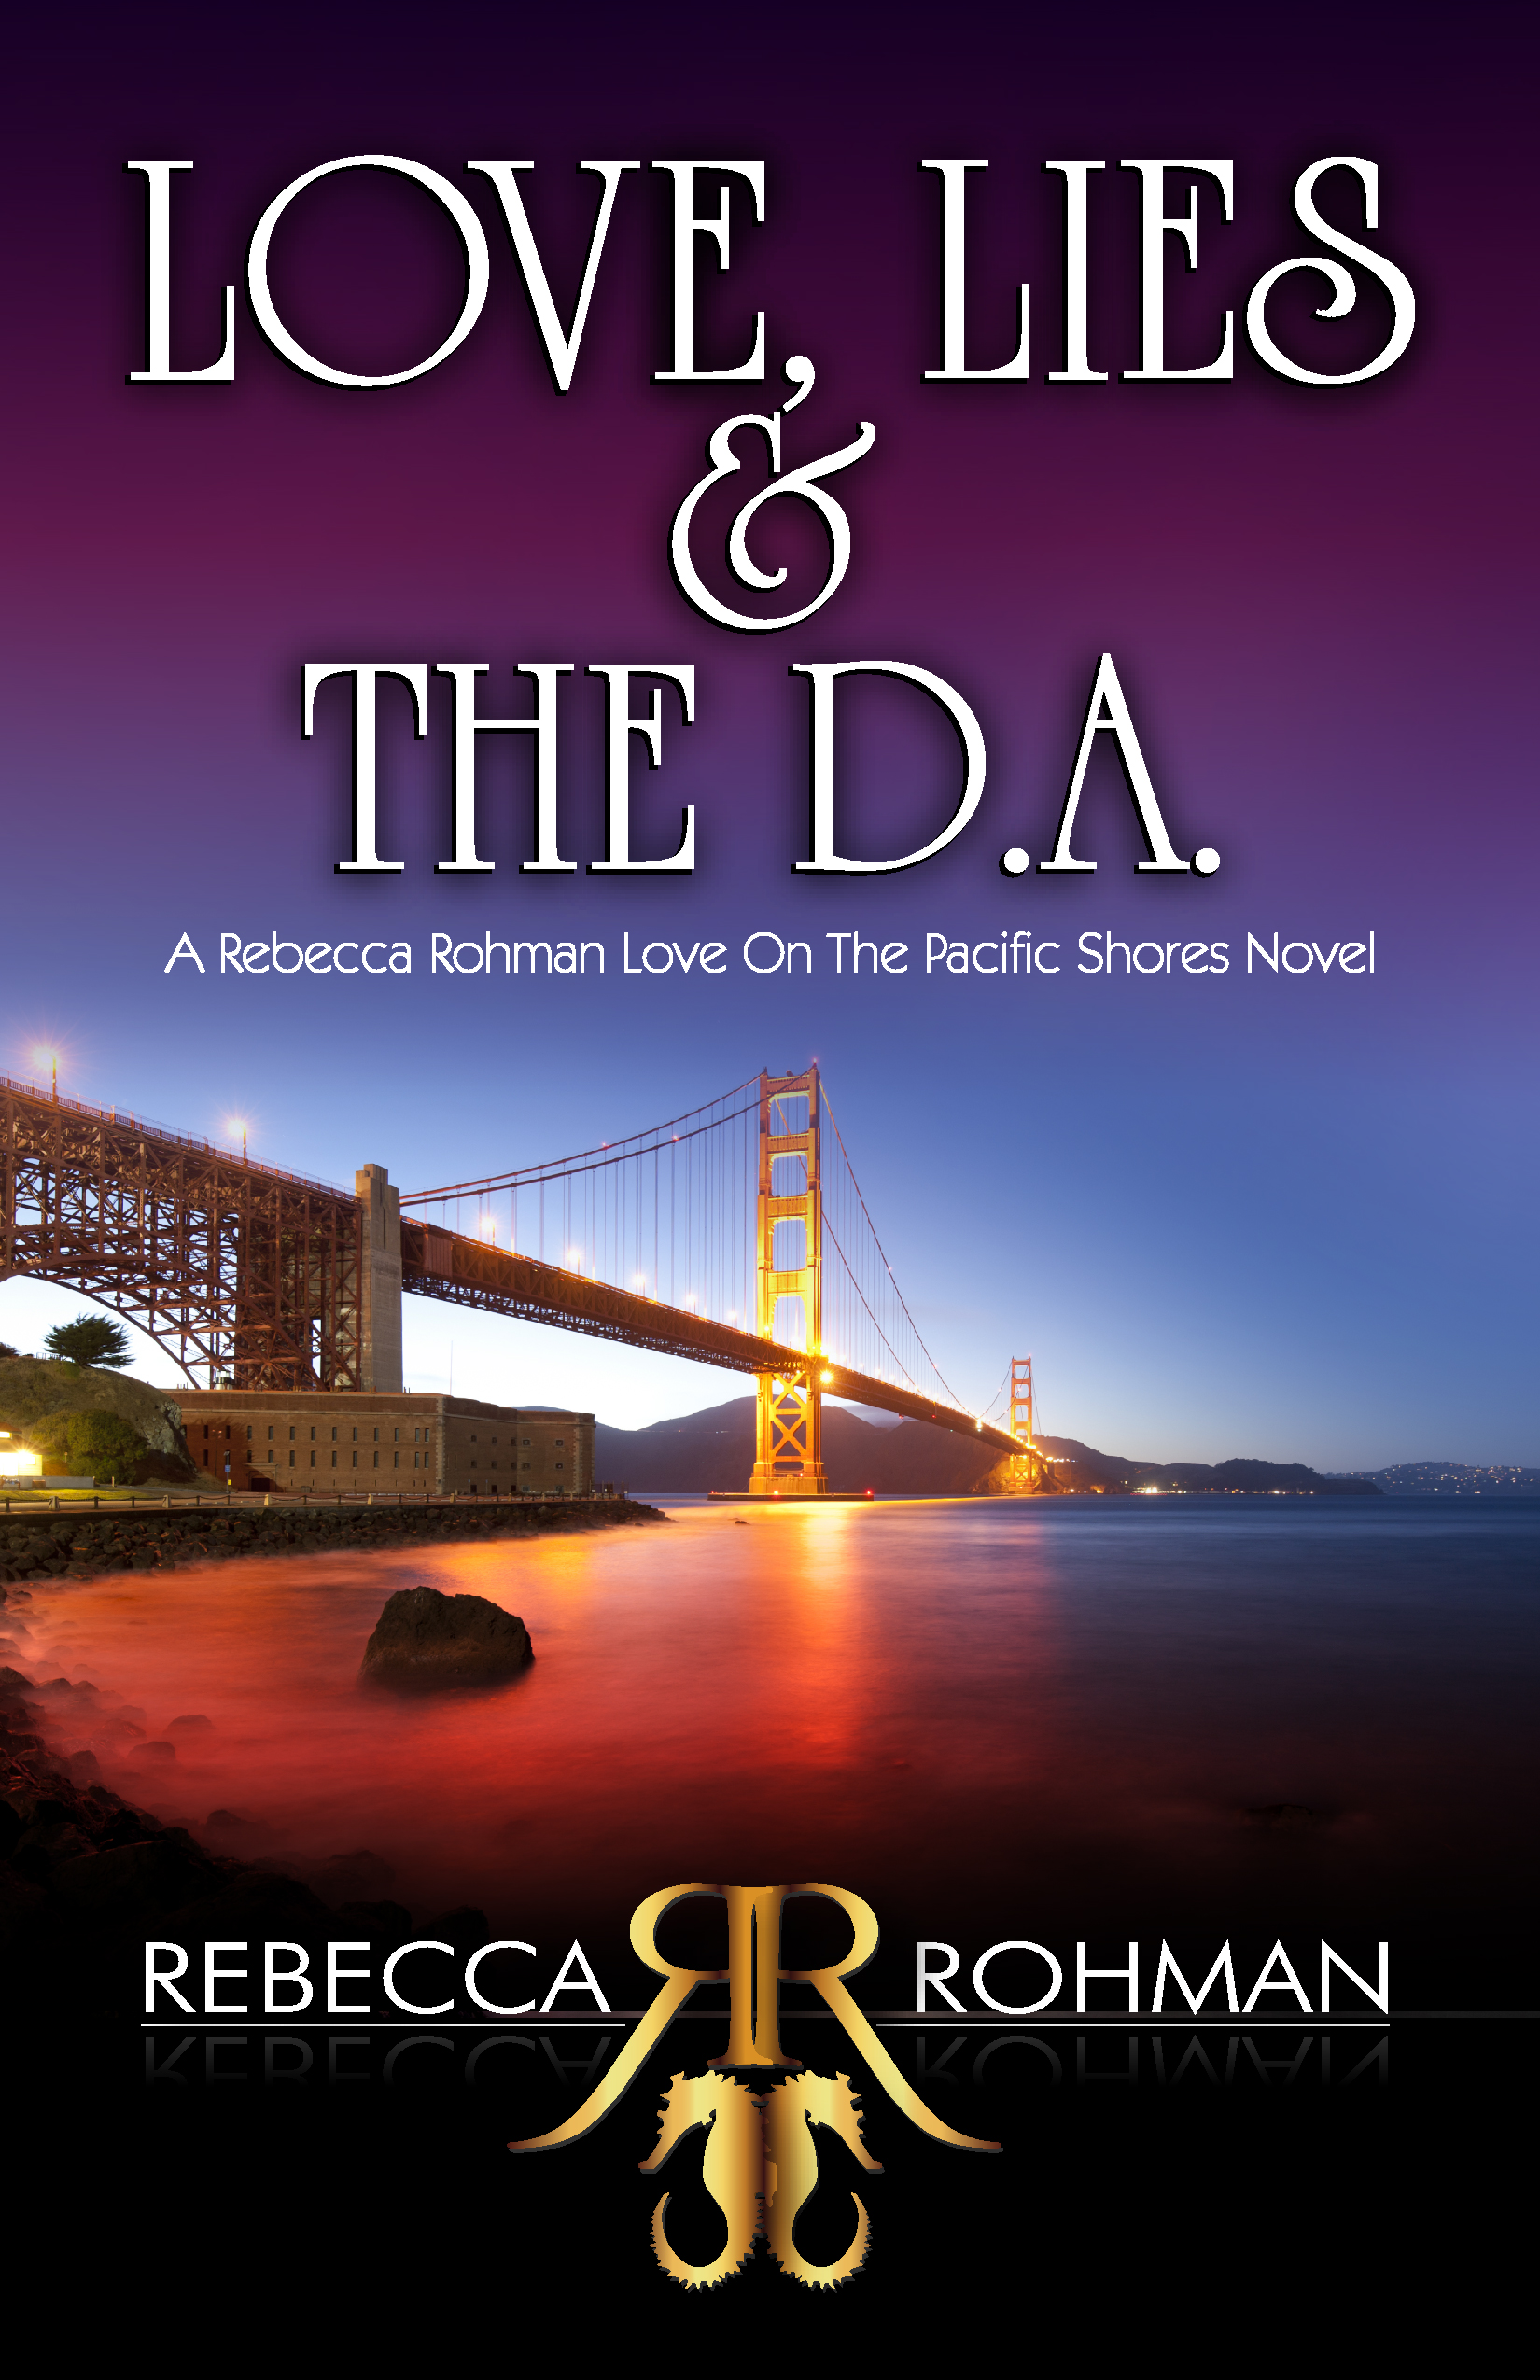 Love, Lies & The DA. Autographed Paperback - NEW COVER